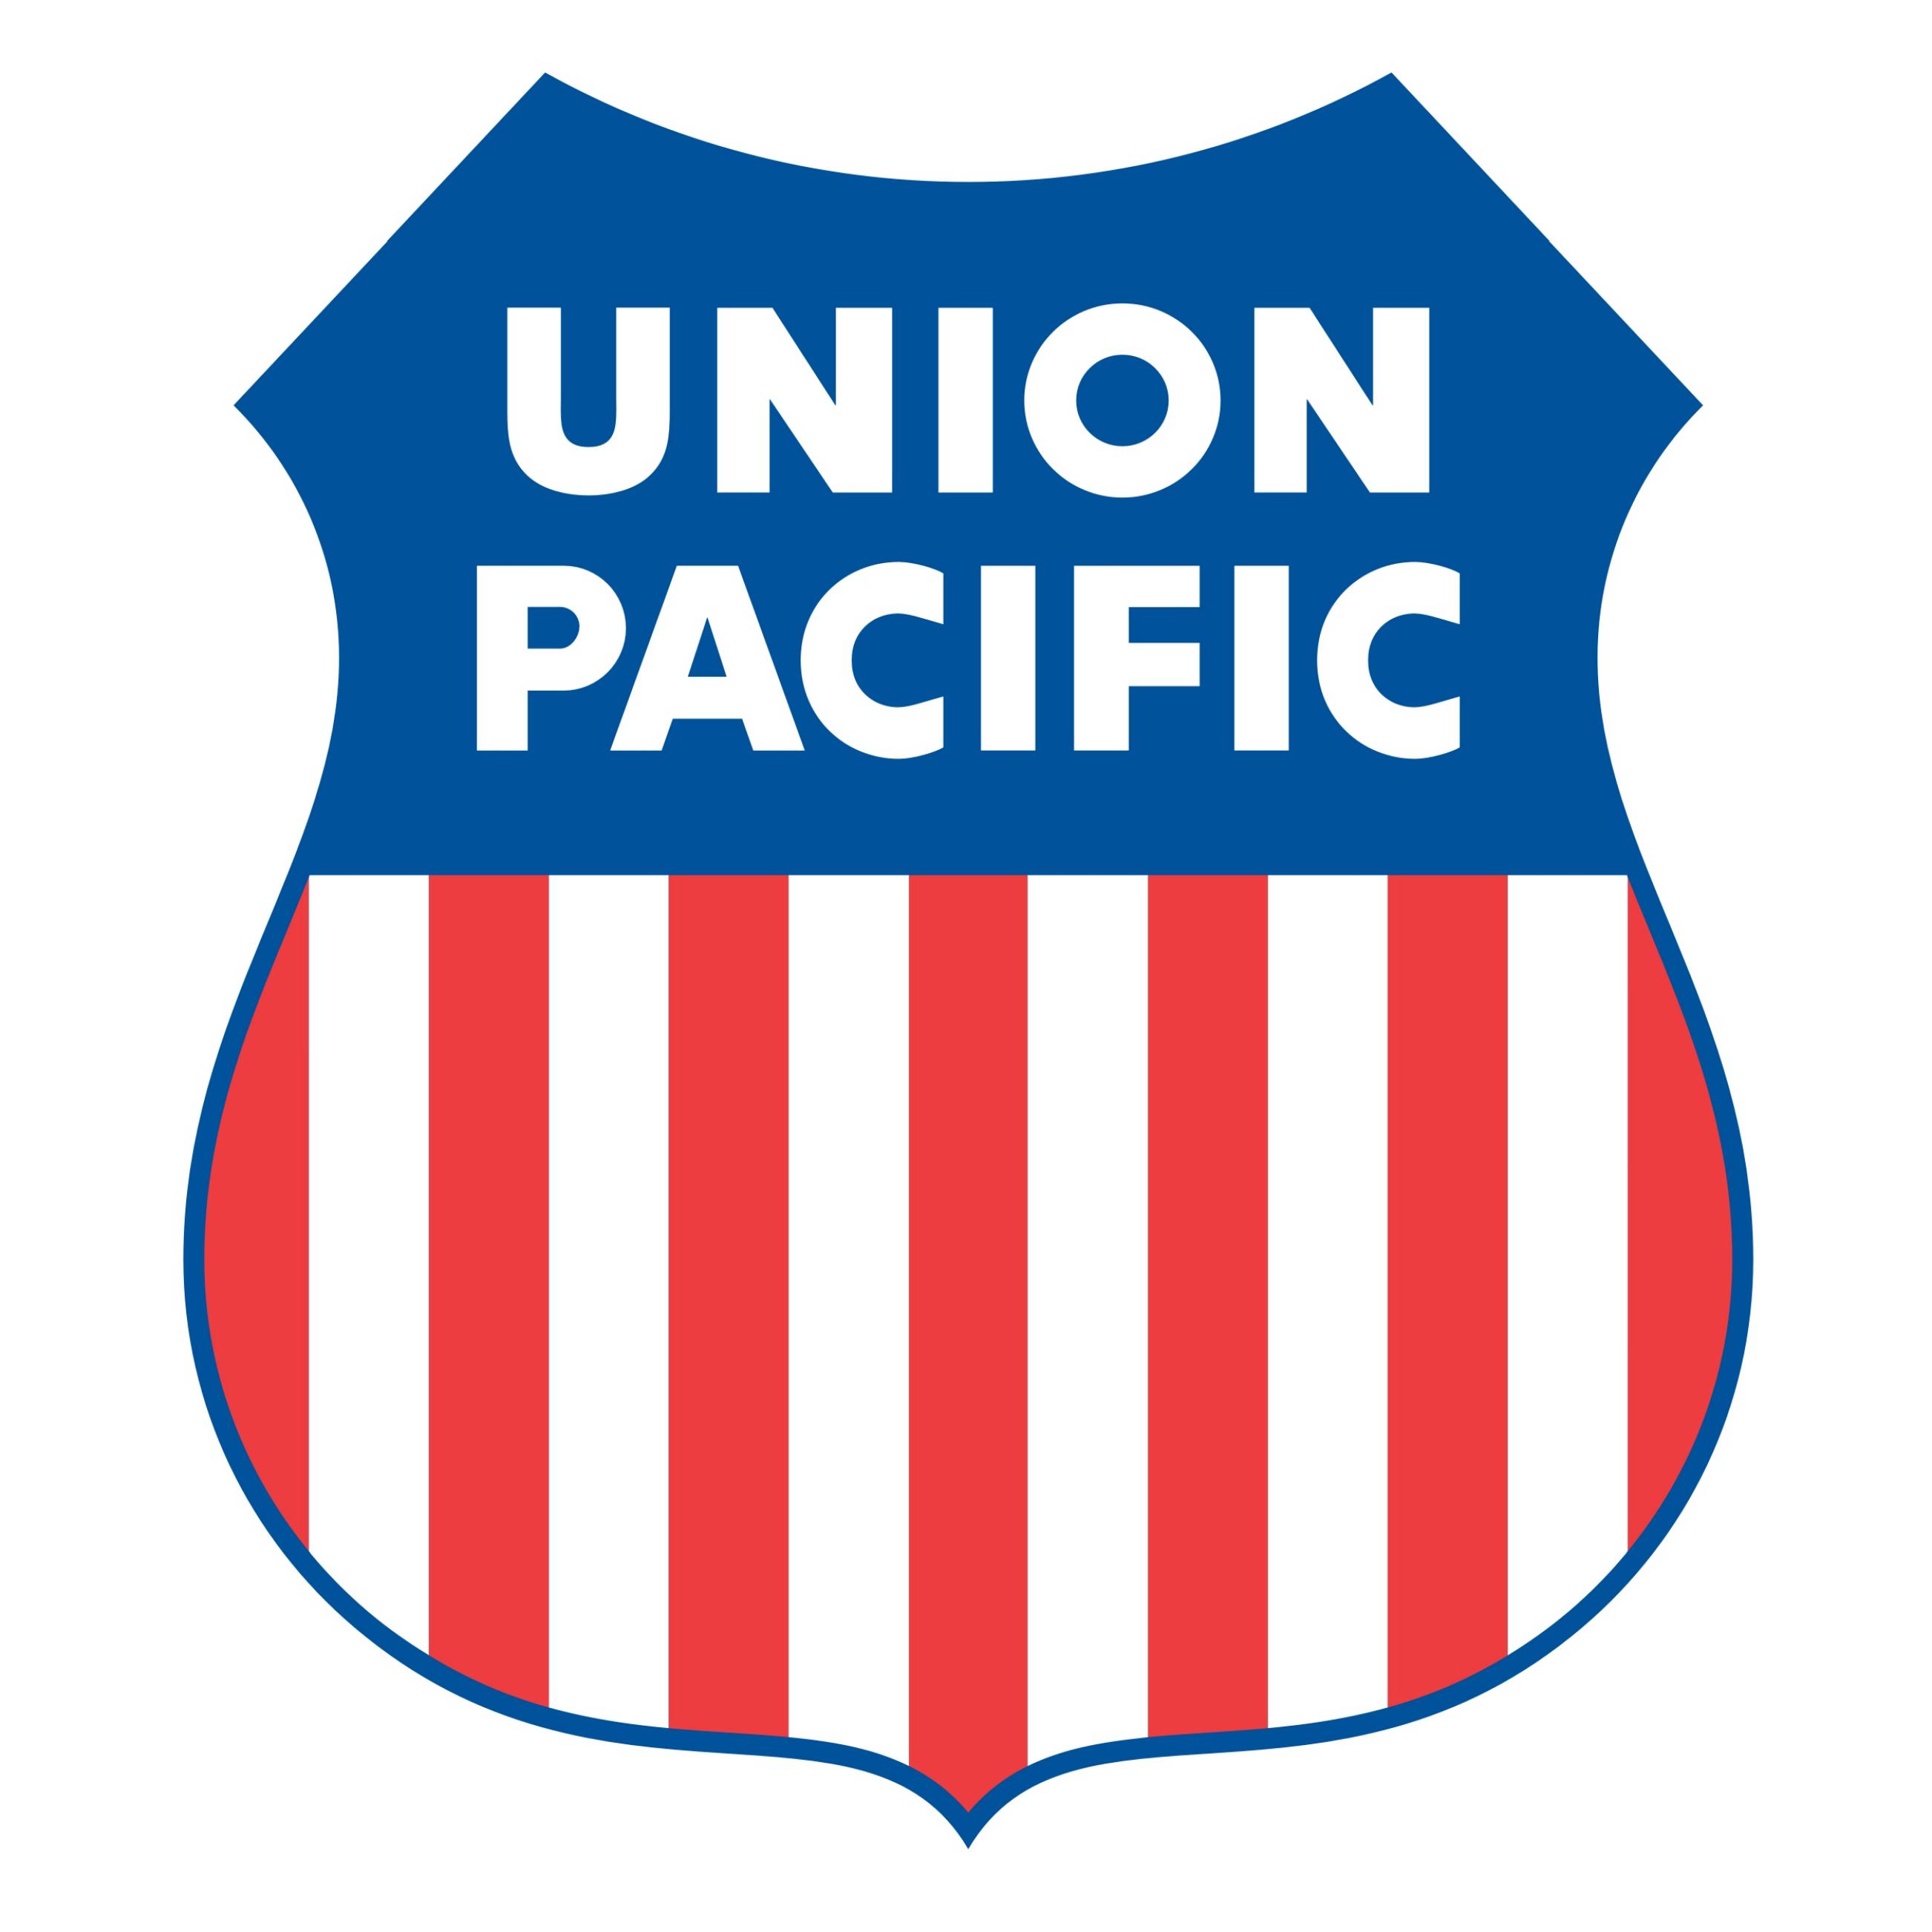 UP u2013 Union Pacific Railroad Logo, Union Pacific Vector PNG - Free PNG